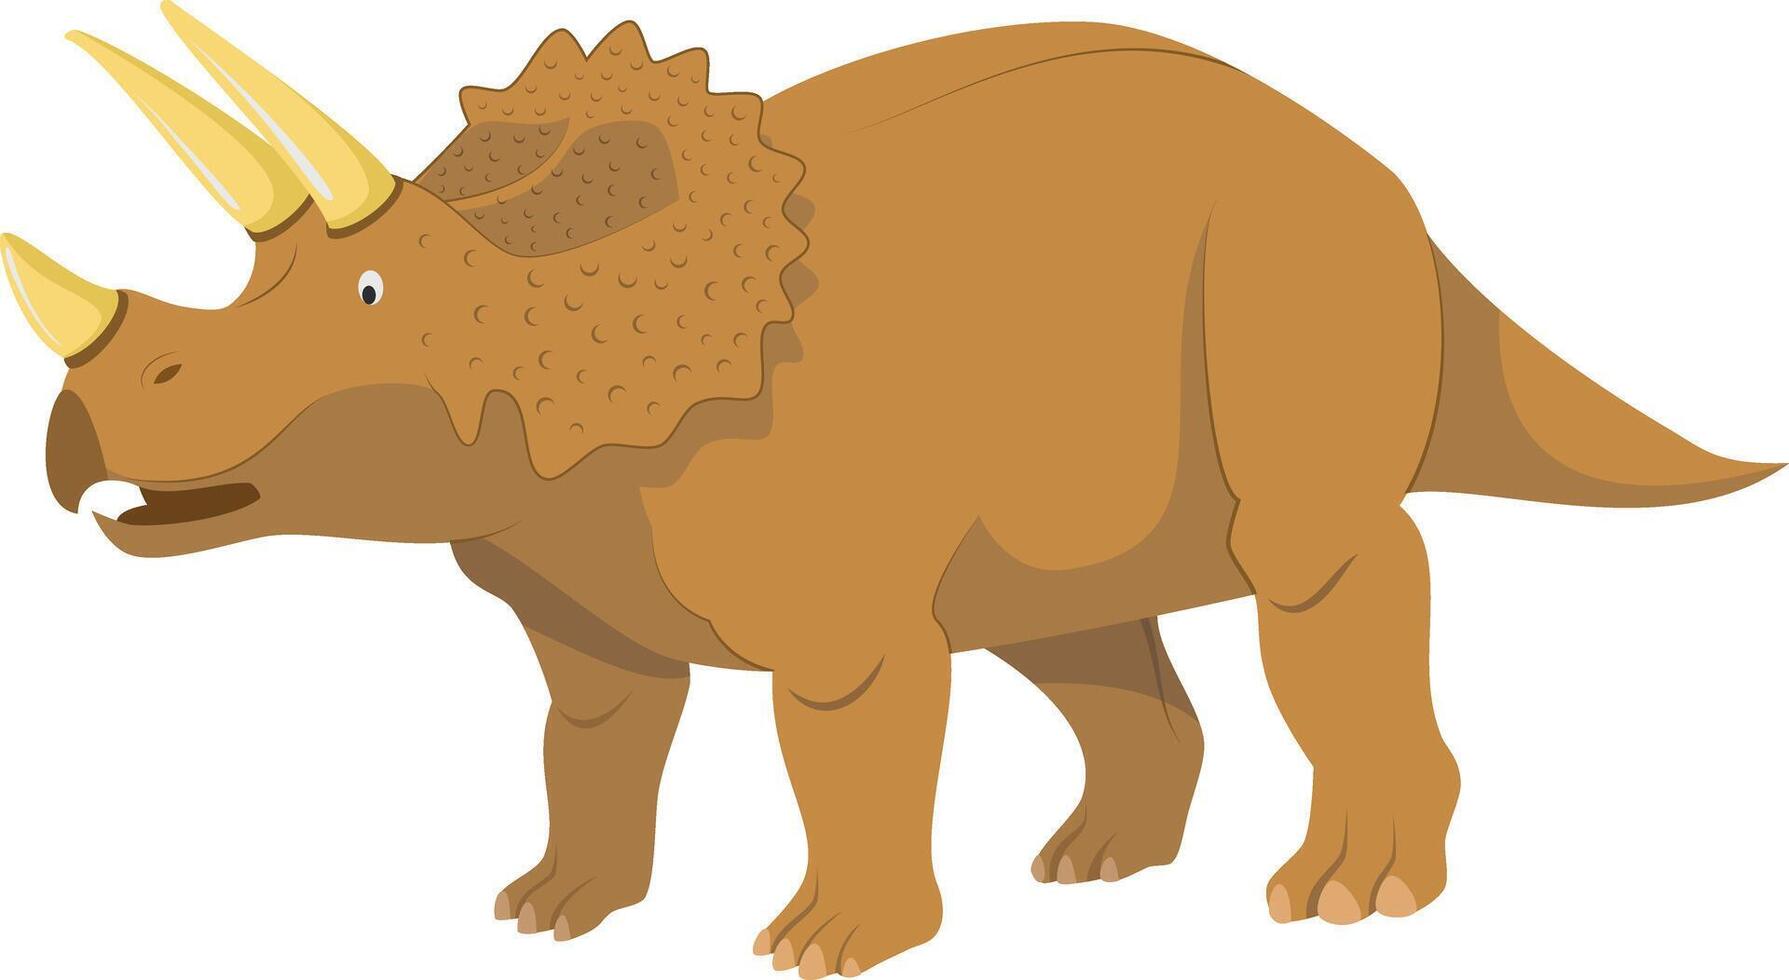 Triceratops illustration isolated in white background. Dinosaurs Collection. vector